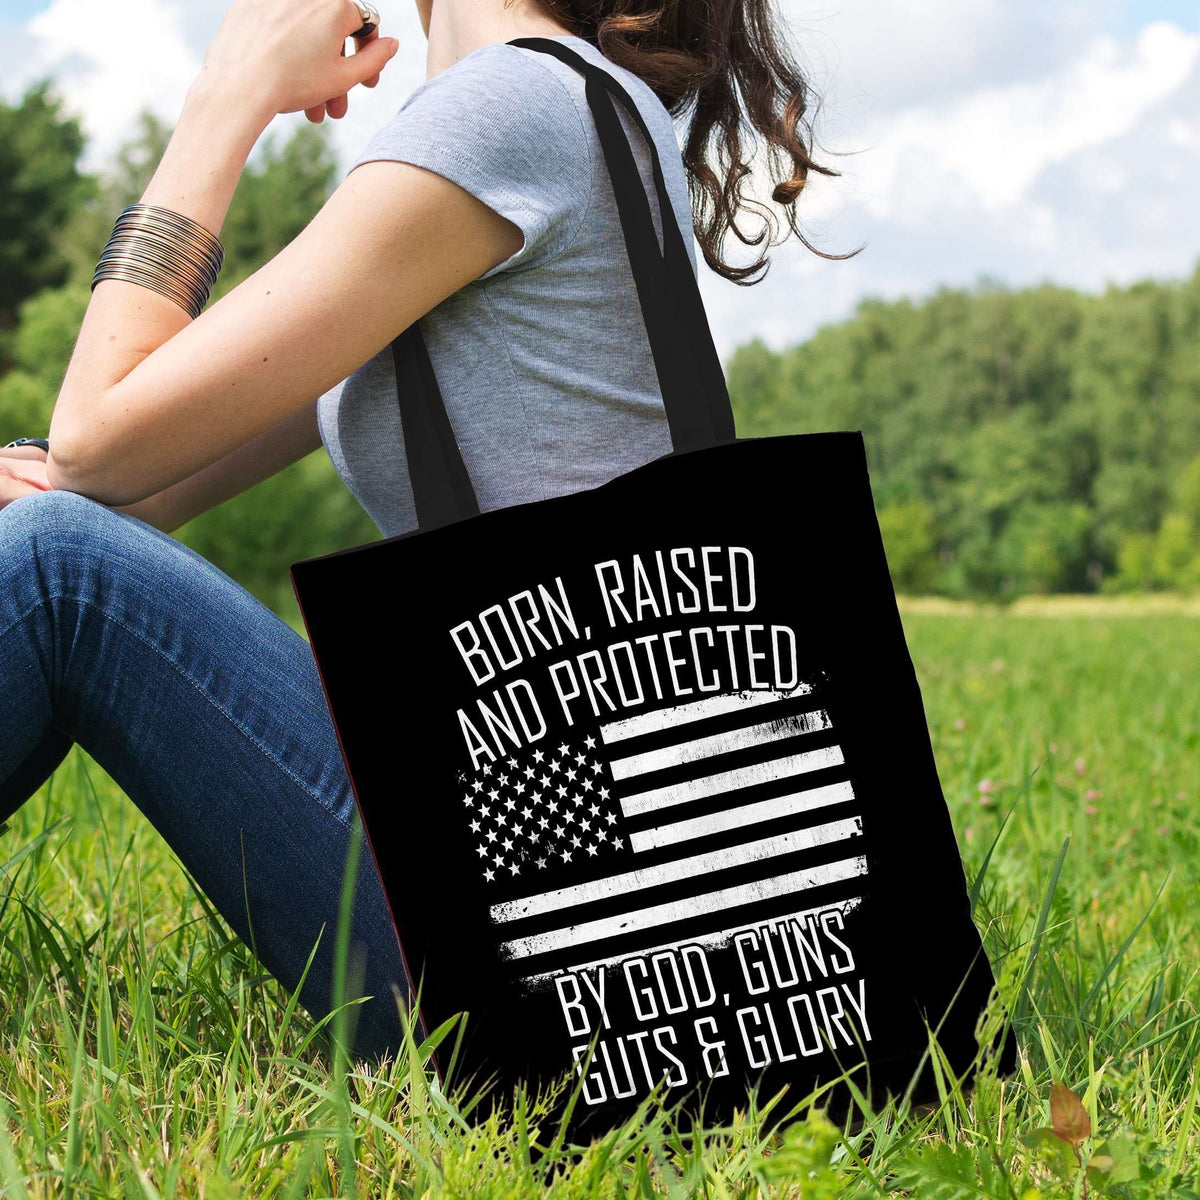 Designs by MyUtopia Shout Out:Born, Raised and Protected by God, Guns, Guts & Glory Fabric Totebag Reusable Shopping Tote